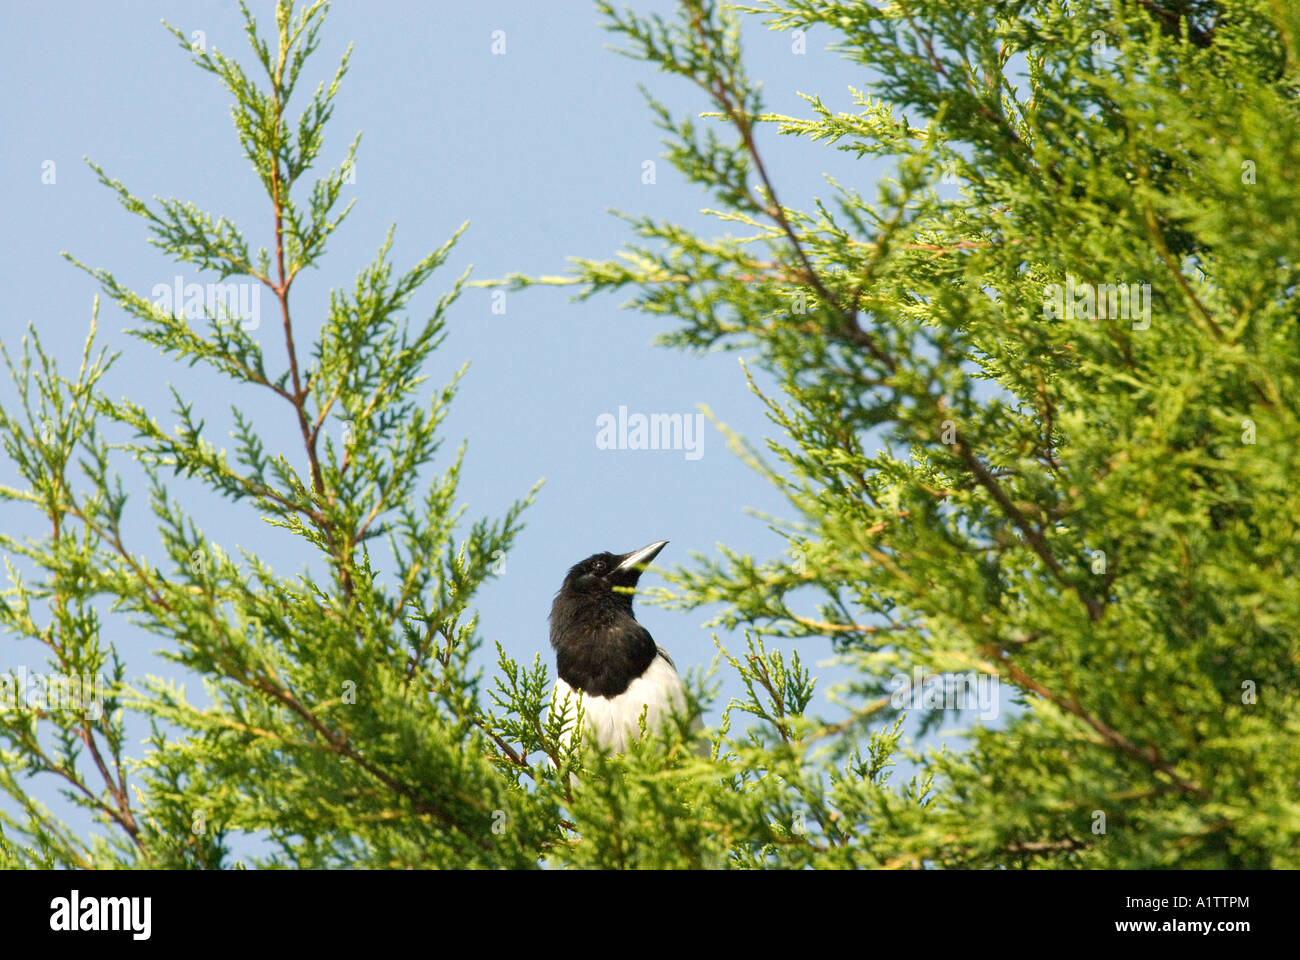 Looking up at a black & white Magpie (pica pica) perched in top of a green fir tree, on a sunny day in Oxford, UK Stock Photo